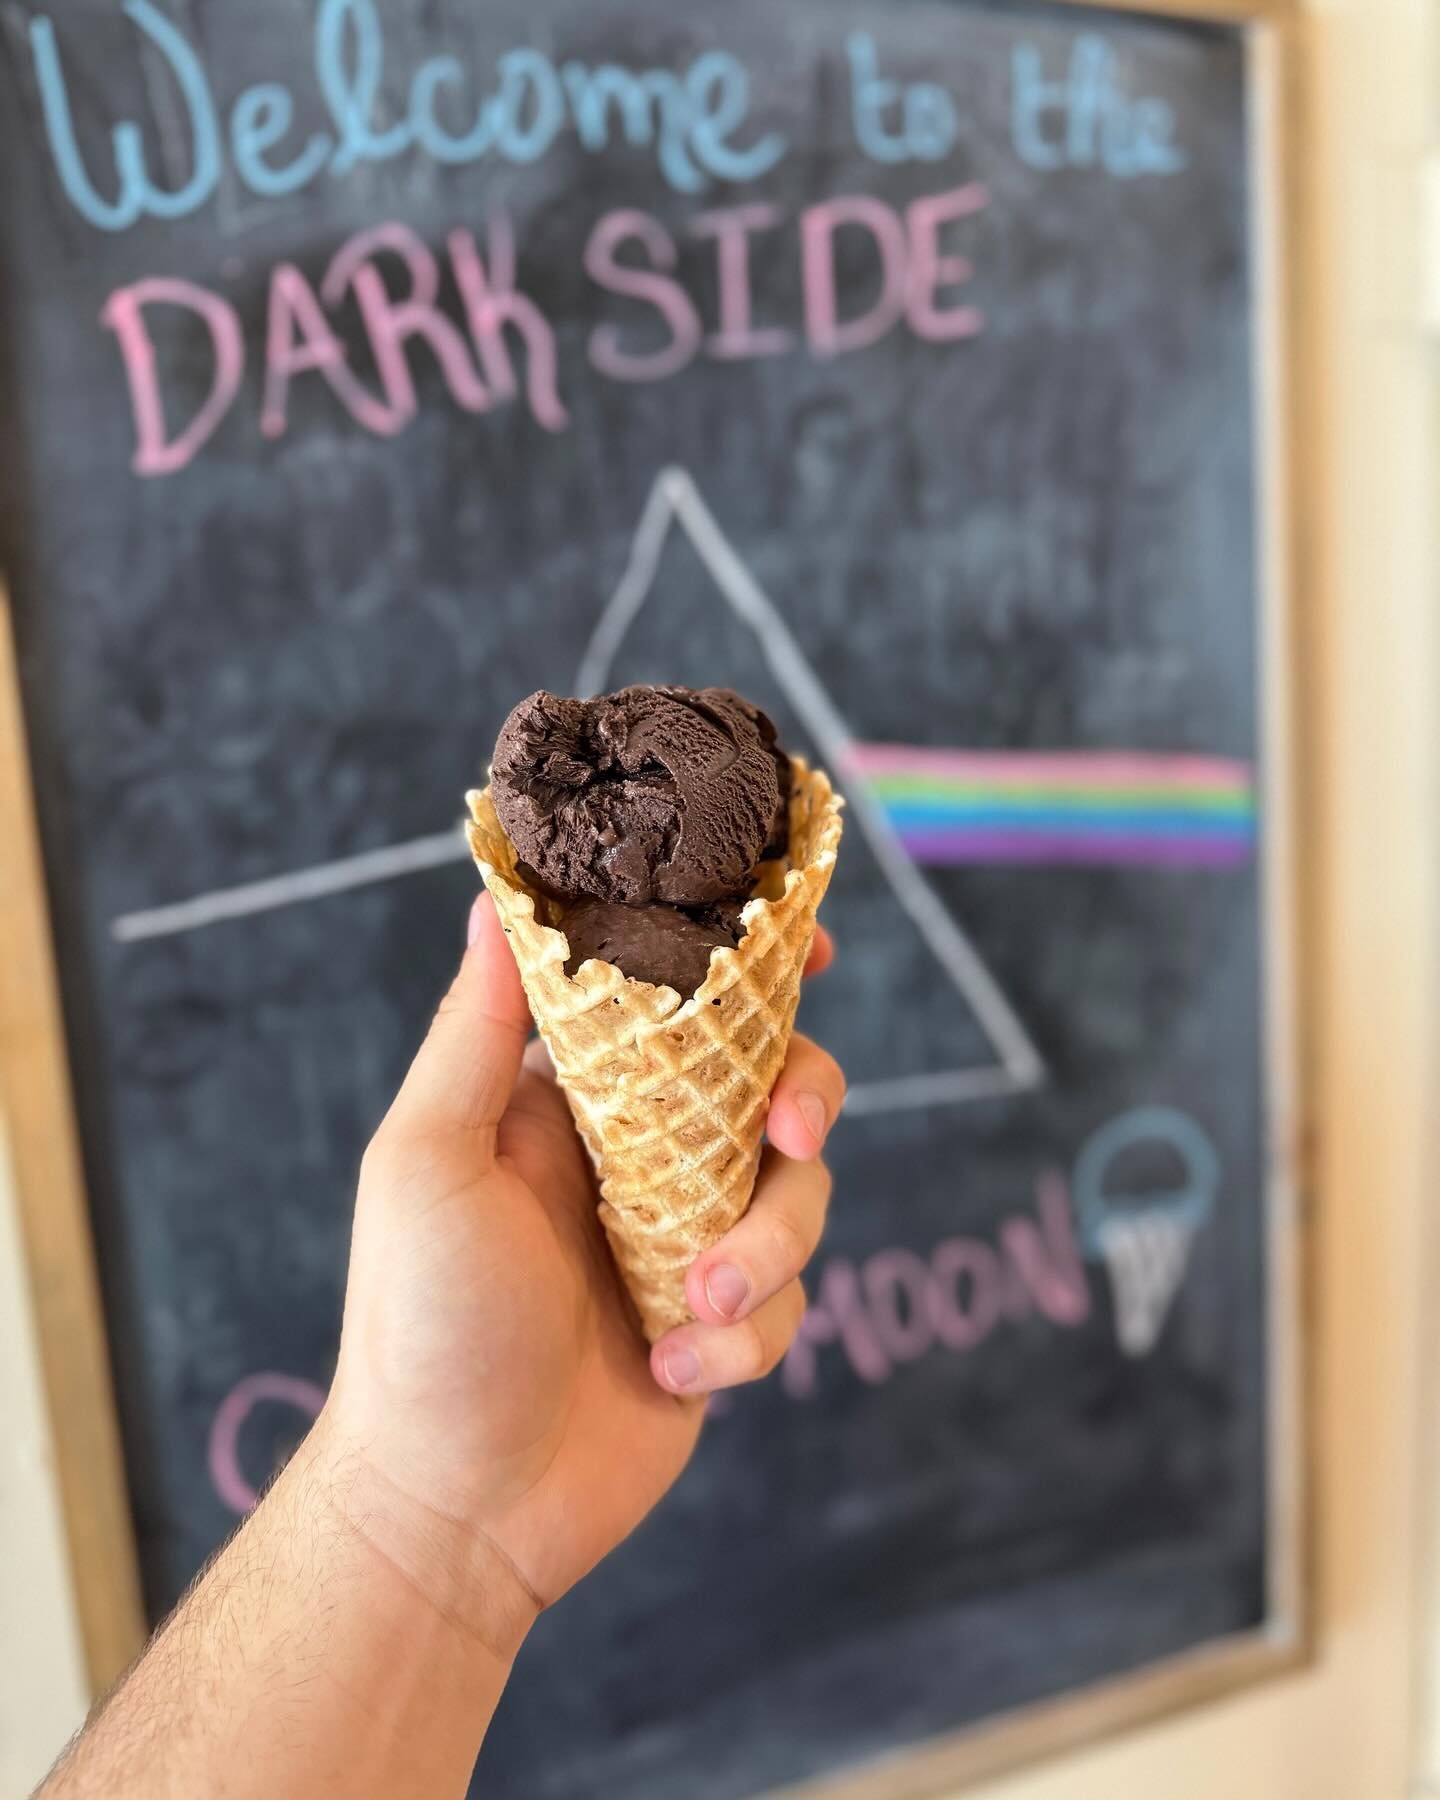 Happy Eclipse Day🌒 We&rsquo;re open until 2 today for the eclipse! Come grab a scoop of your favorite out of this world ice cream to pair with your viewing! See you soon🤍✨